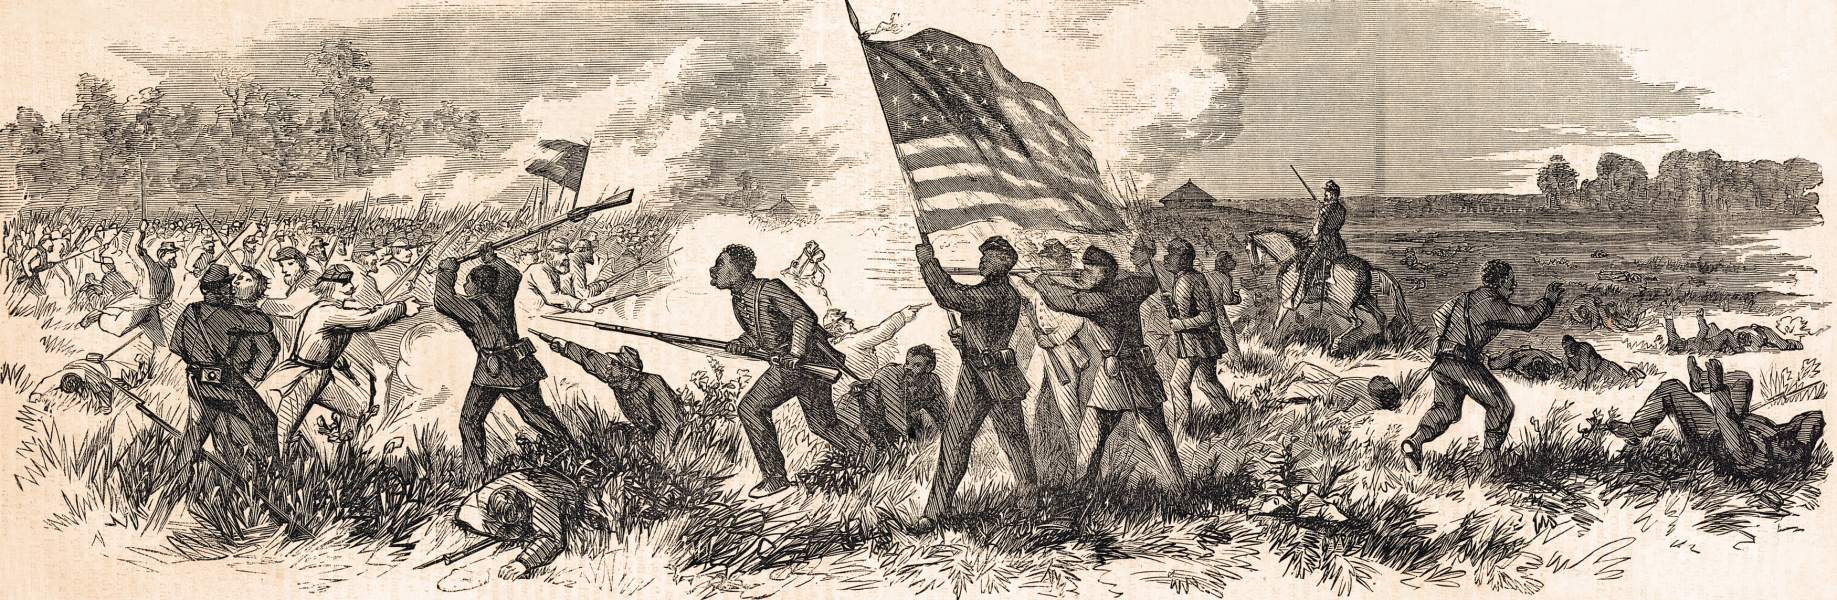 African American troops at the Battle of Milliken's Bend, Louisiana, June 7, 1863, artist's impression, zoomable image